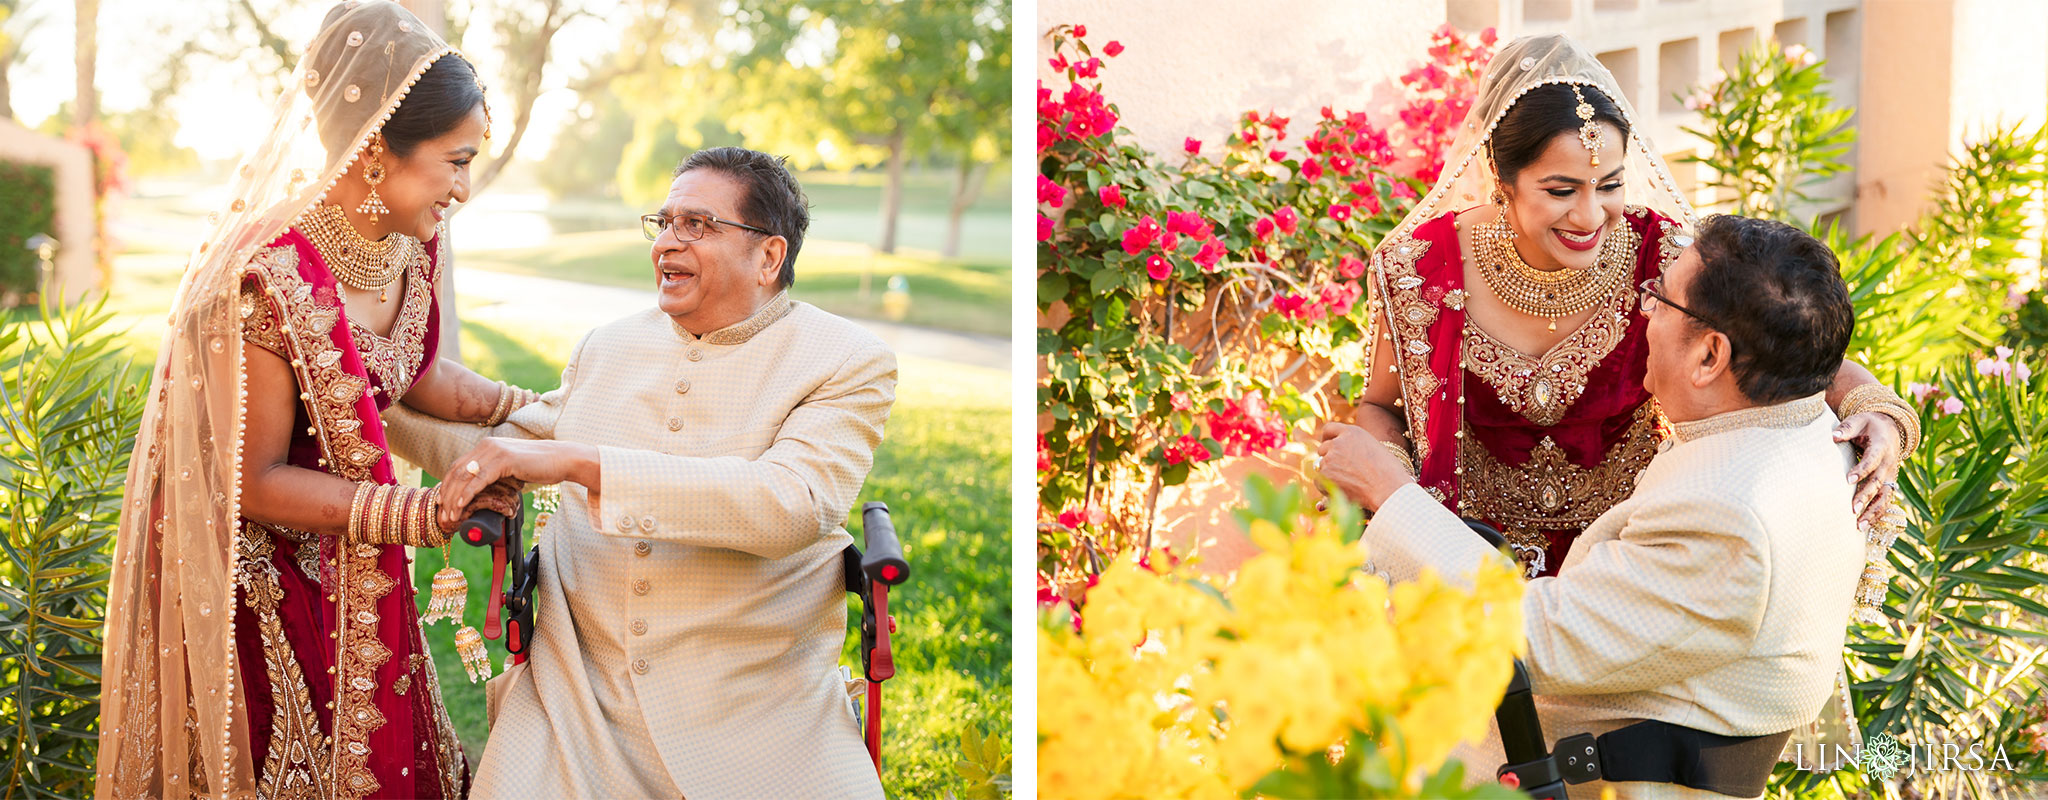 05 Westin Mission Hills Palm Springs Indian Wedding Photography